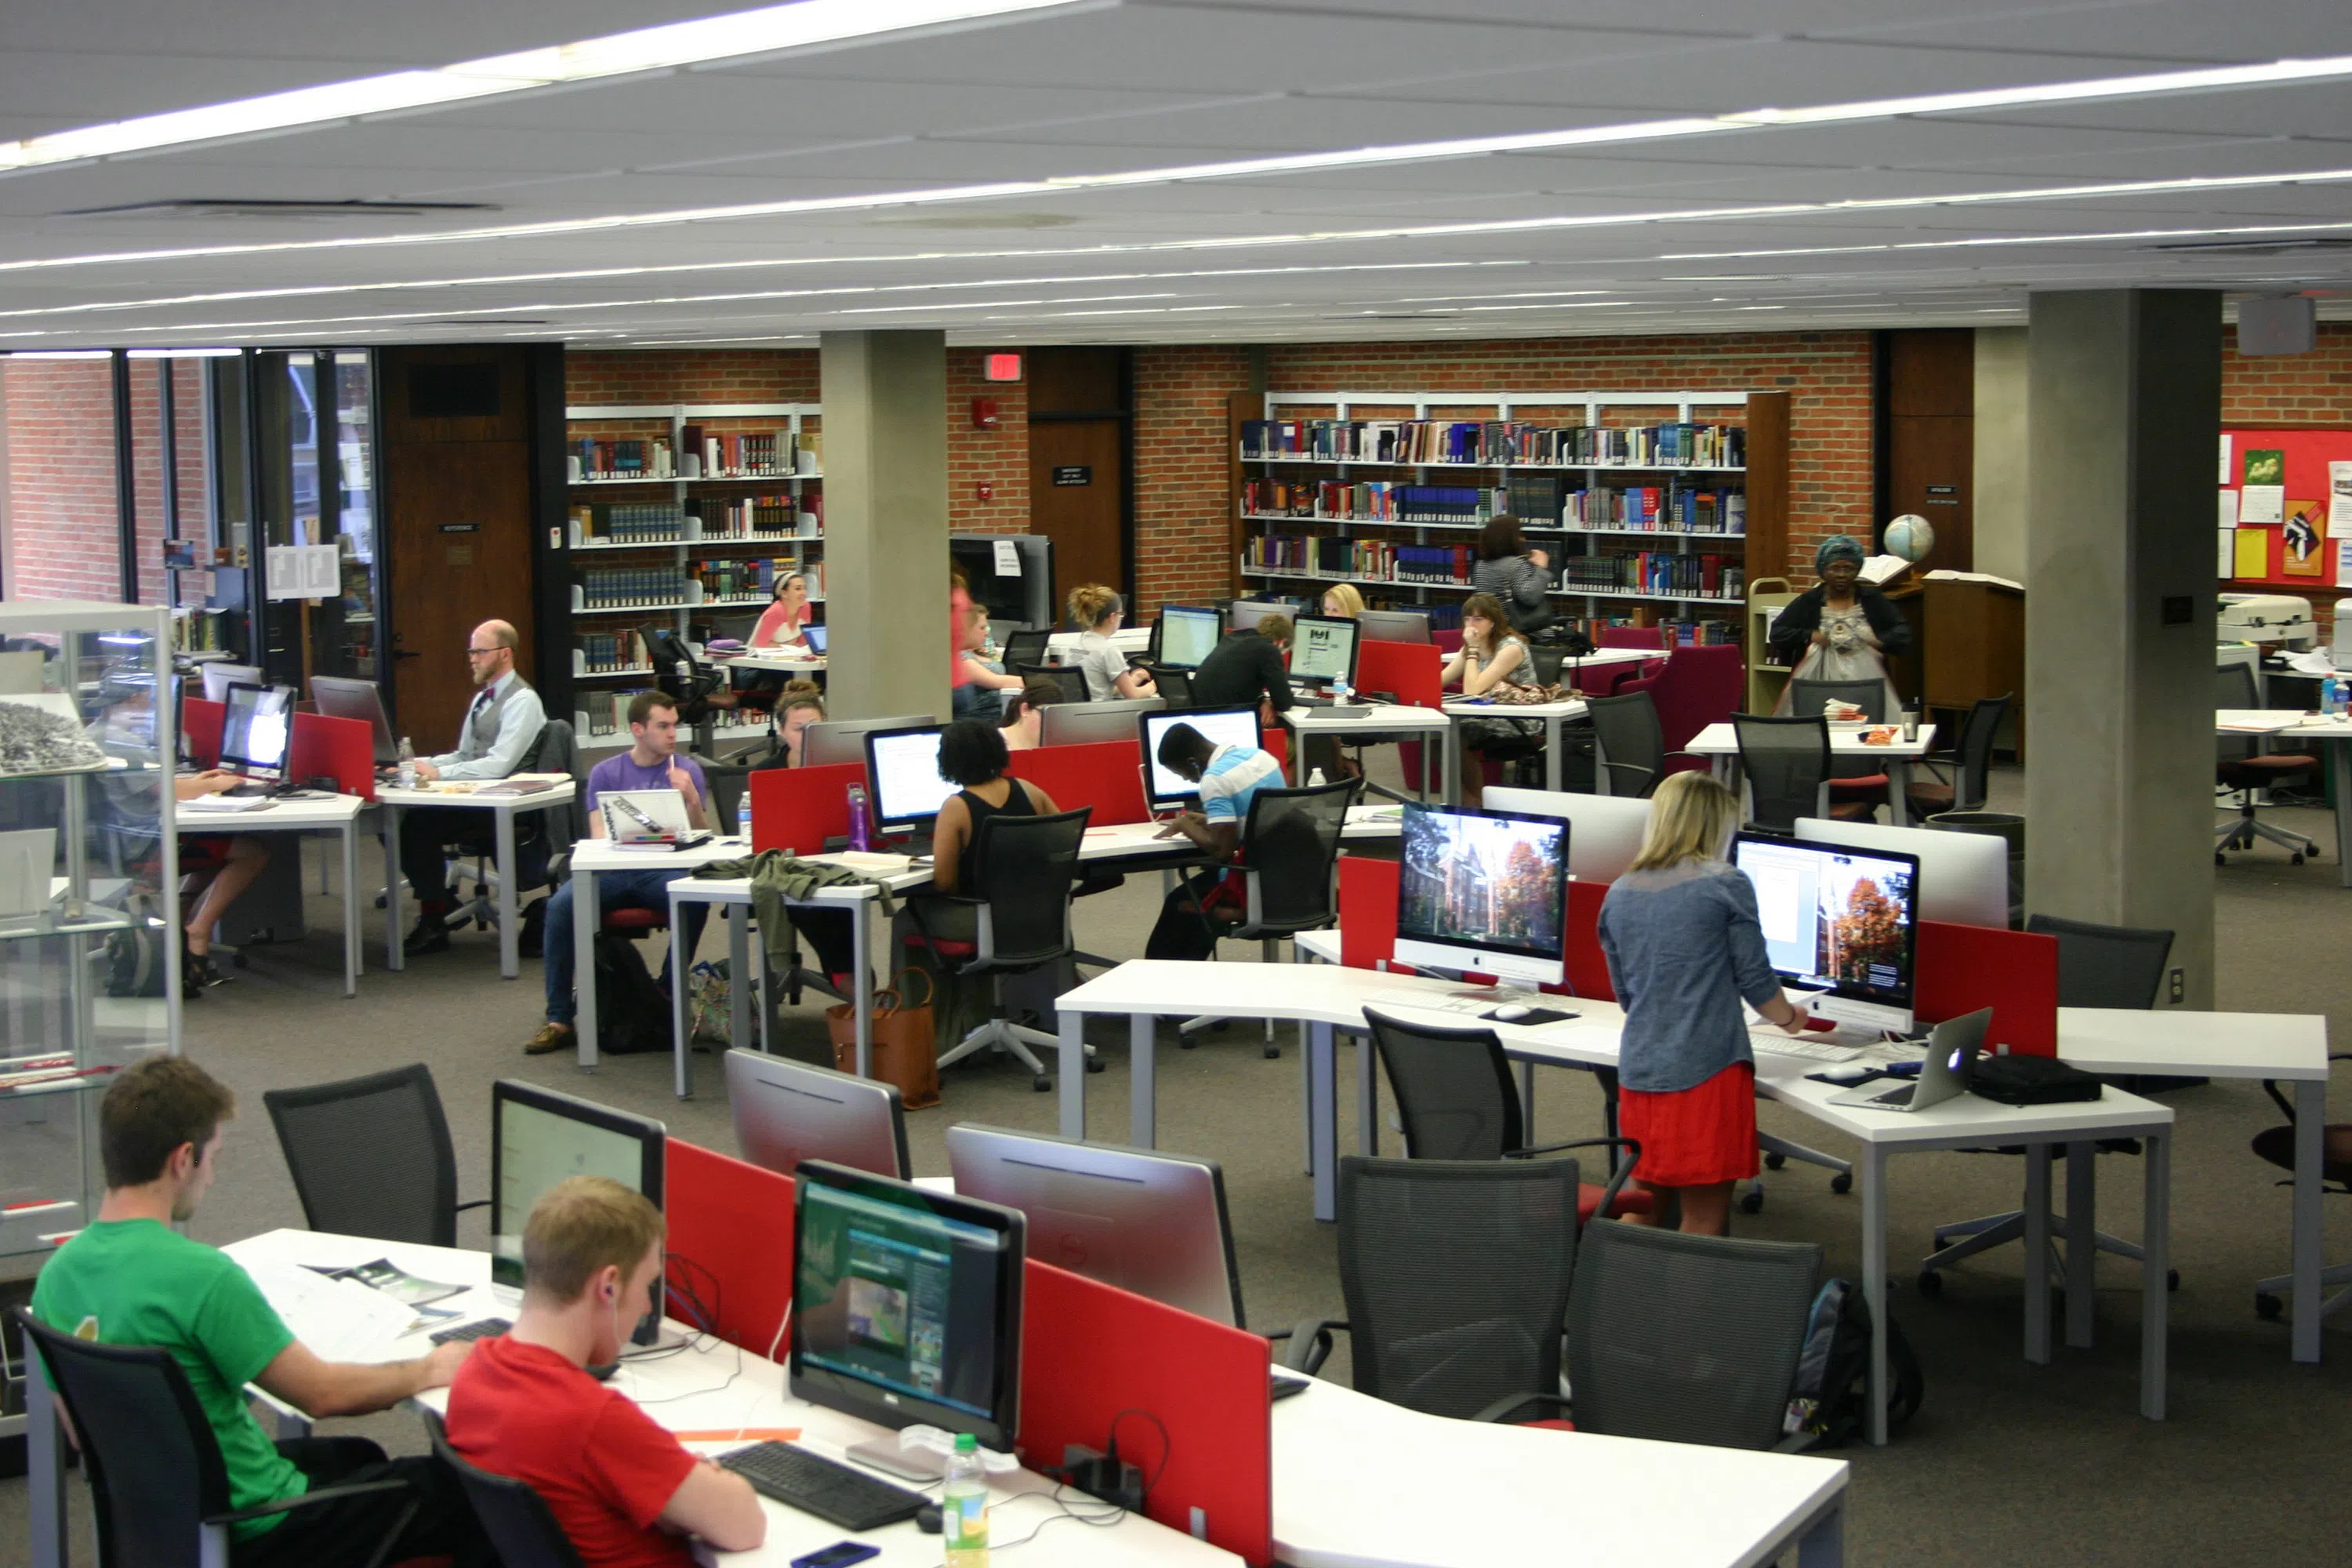 Lively view of the main floor of the Library, tables for groups, public computers, and library staff all in one convenient area.